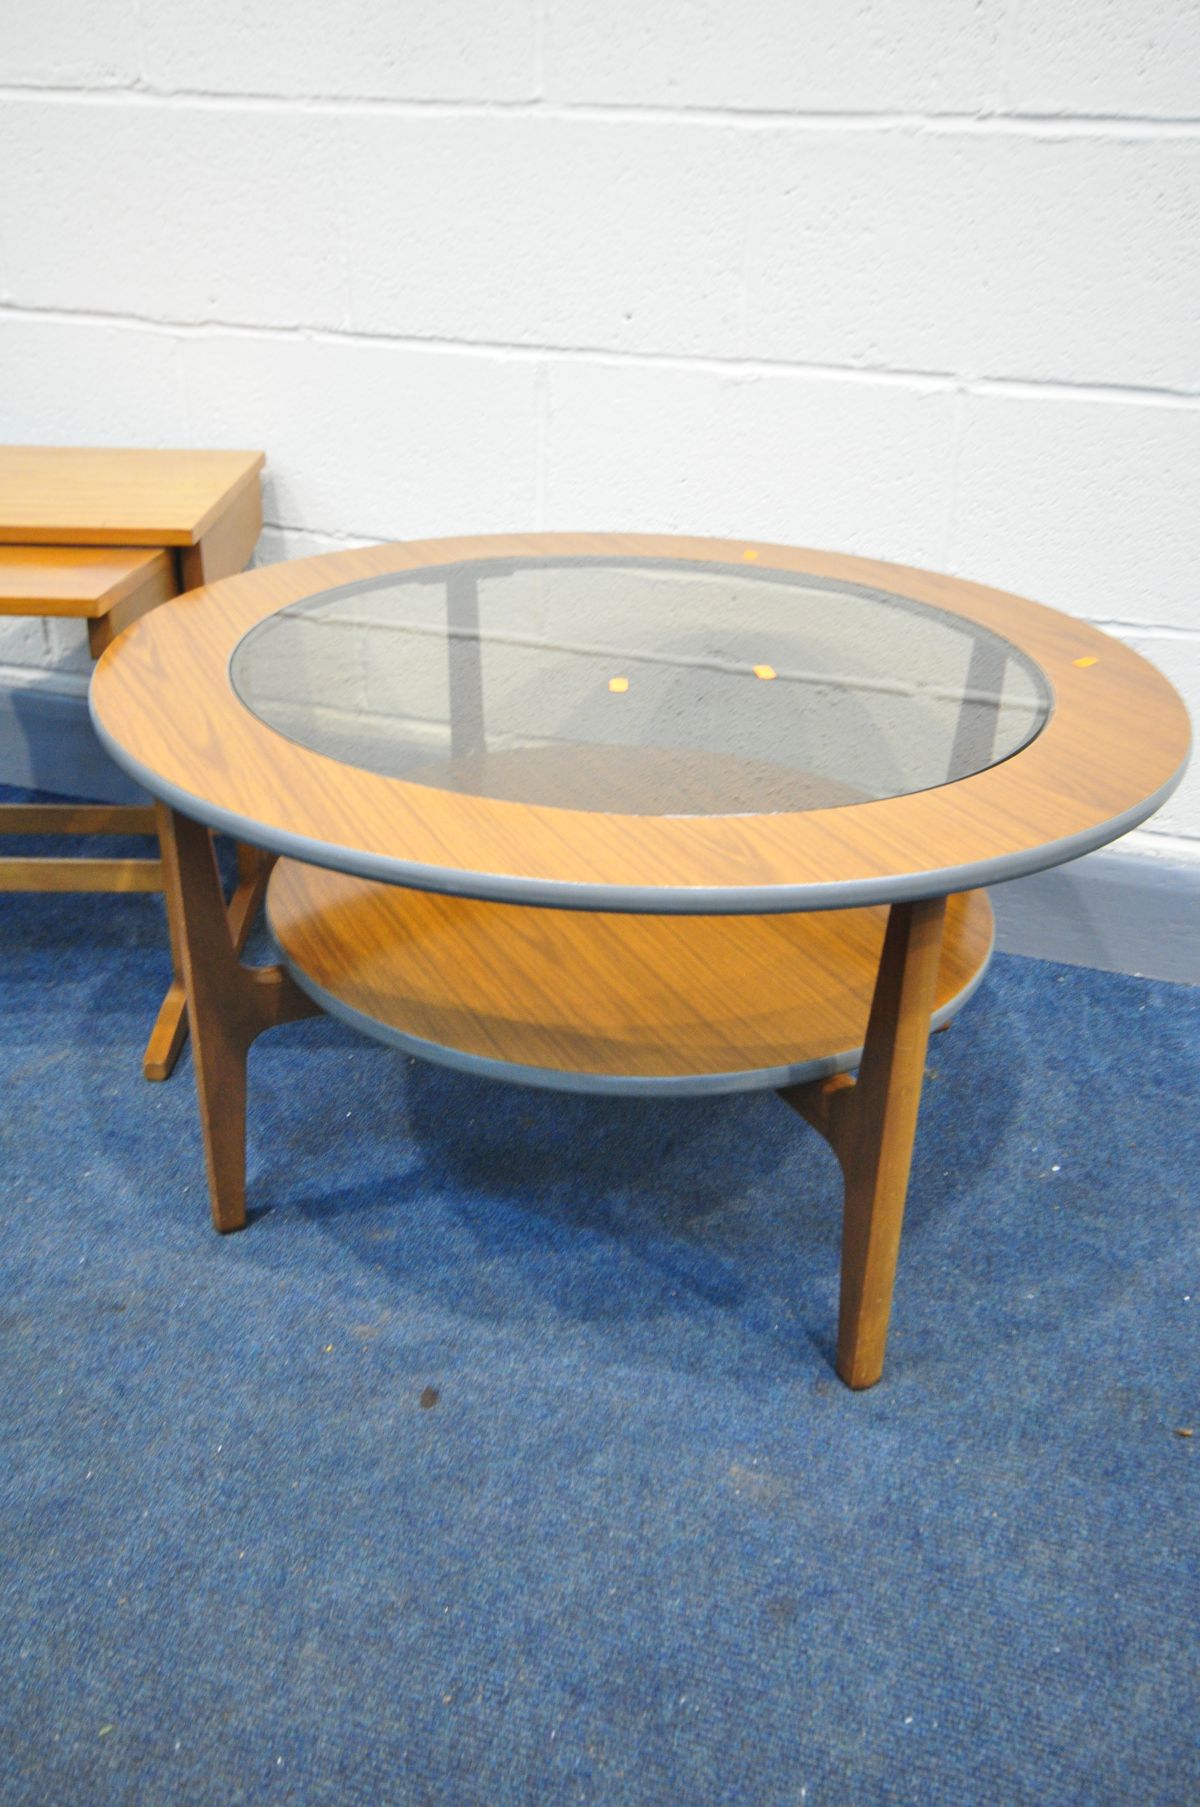 A MID CENTURY TEAK CIRCULAR COFFEE TABLE, with a glass insert, diameter 85cm x height 46cm, and a - Image 2 of 3